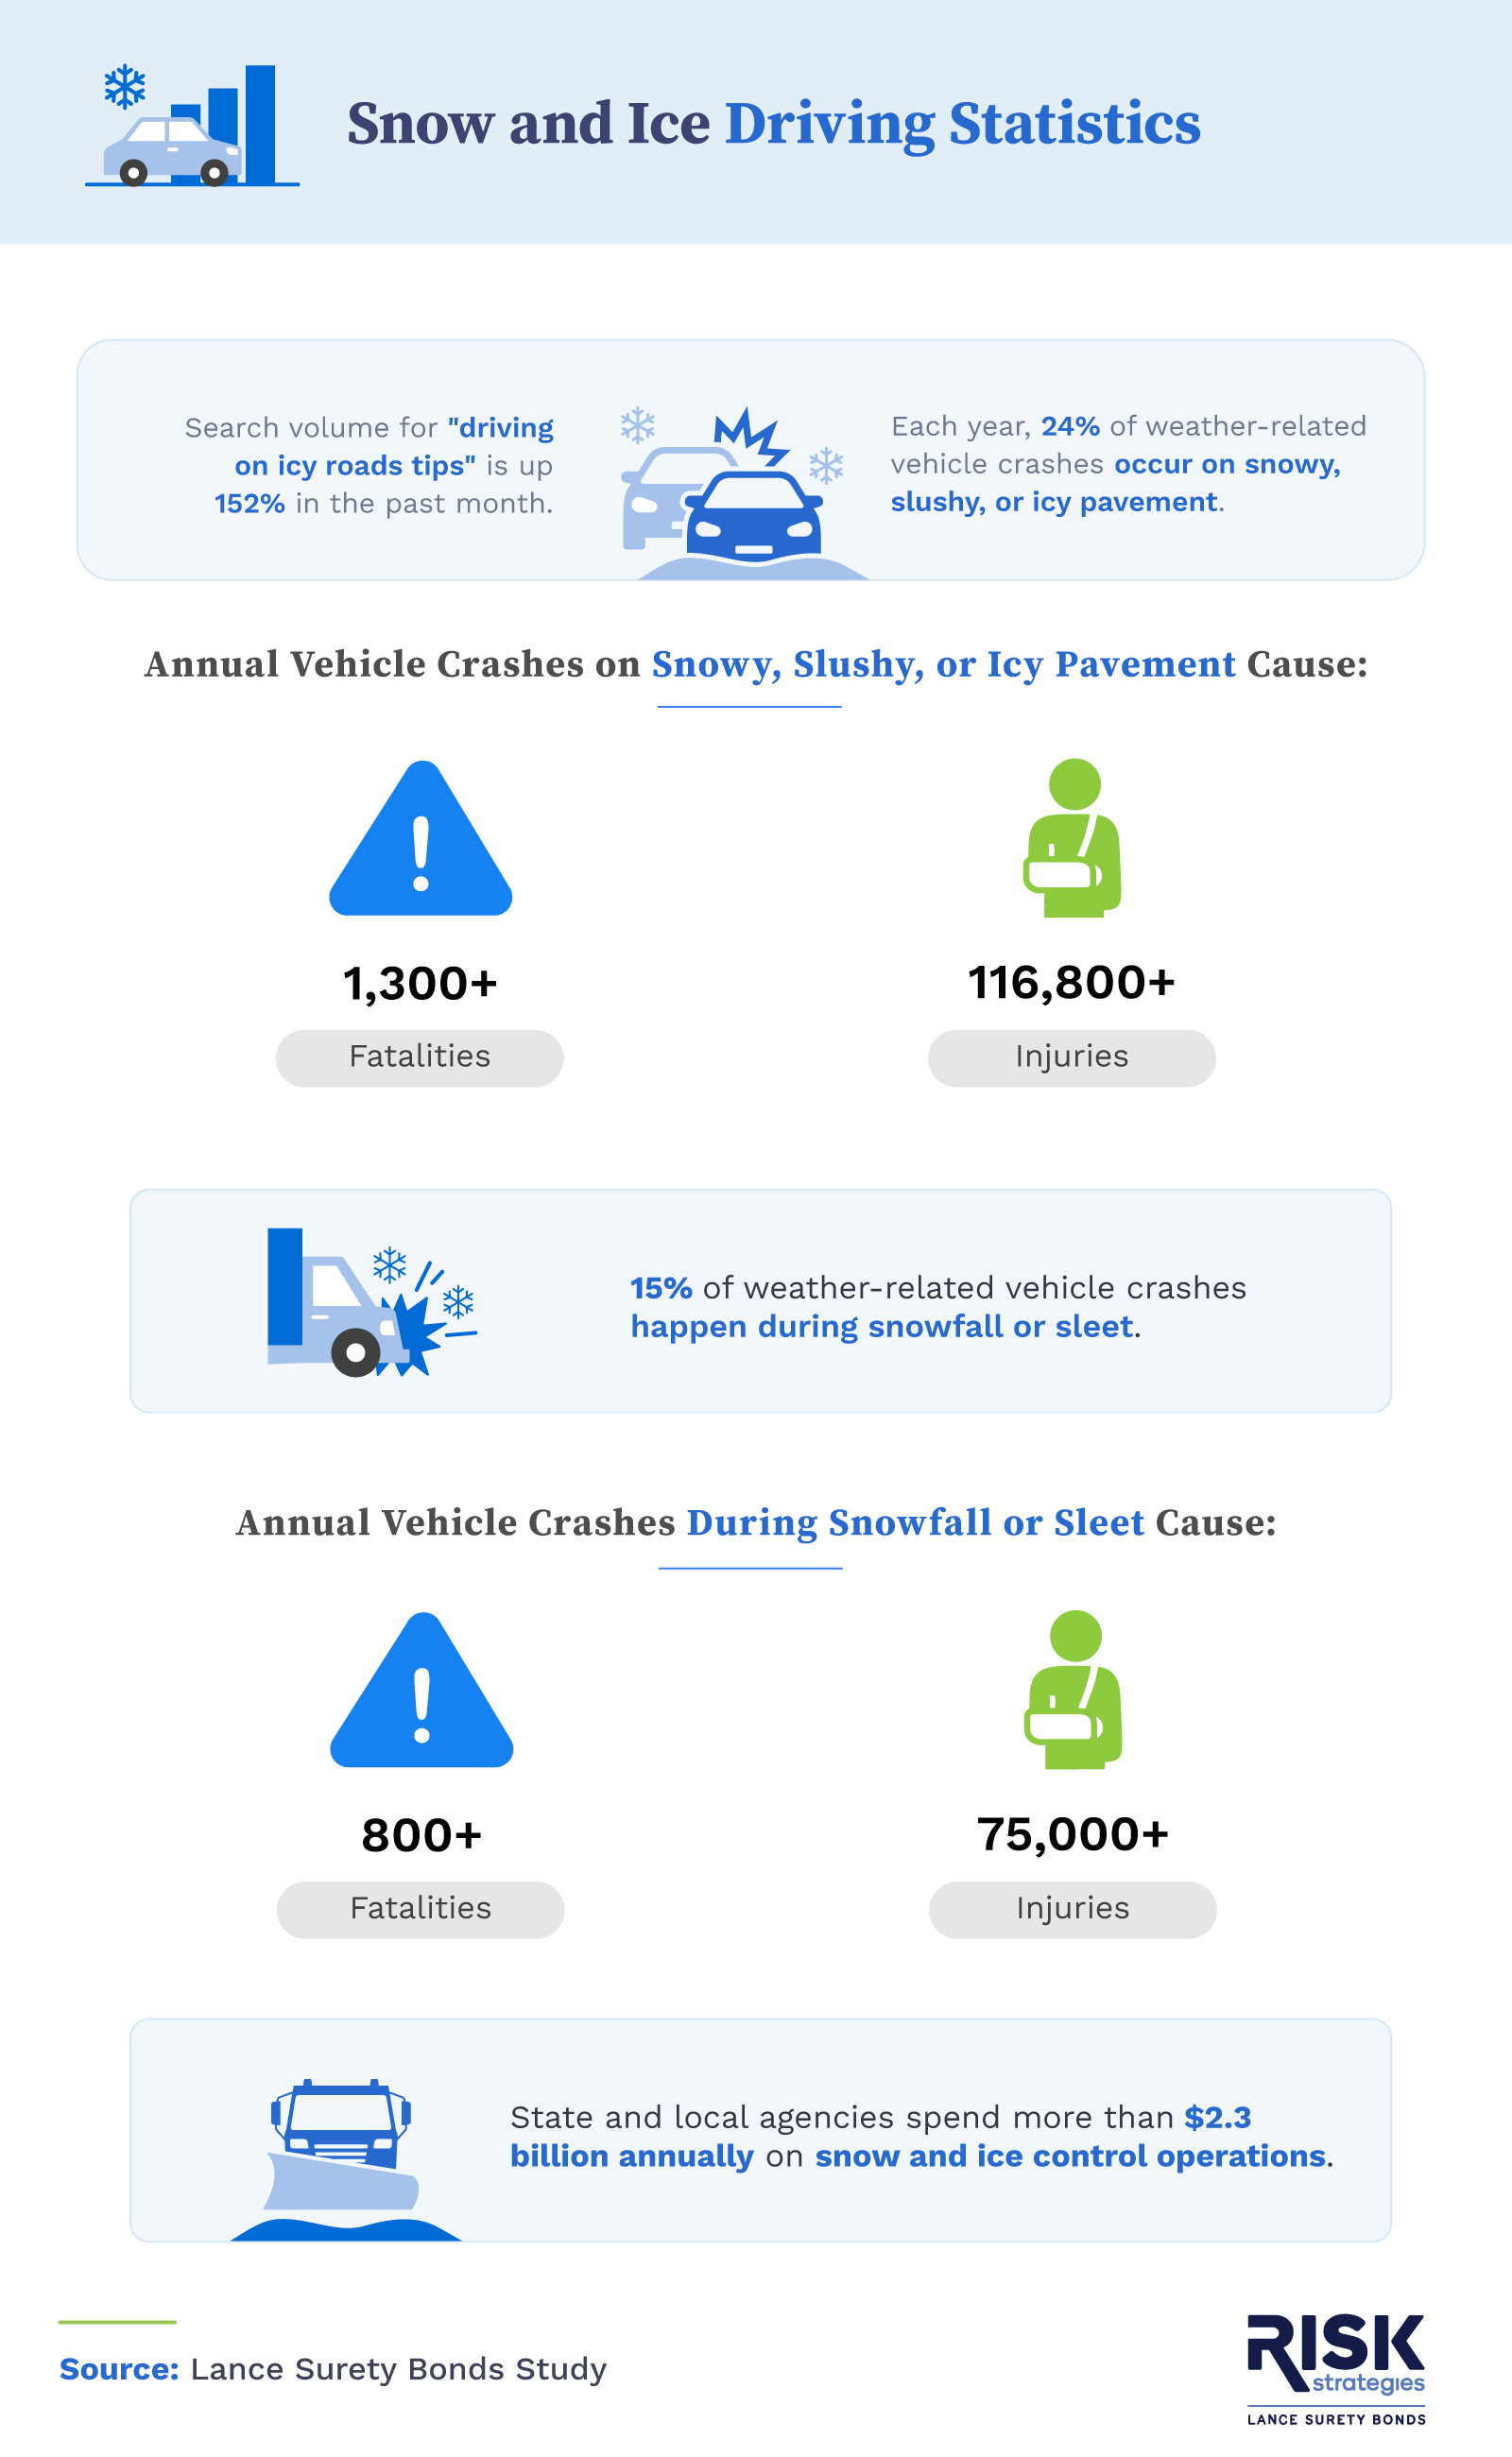 Snow and ice driving statistics infographic